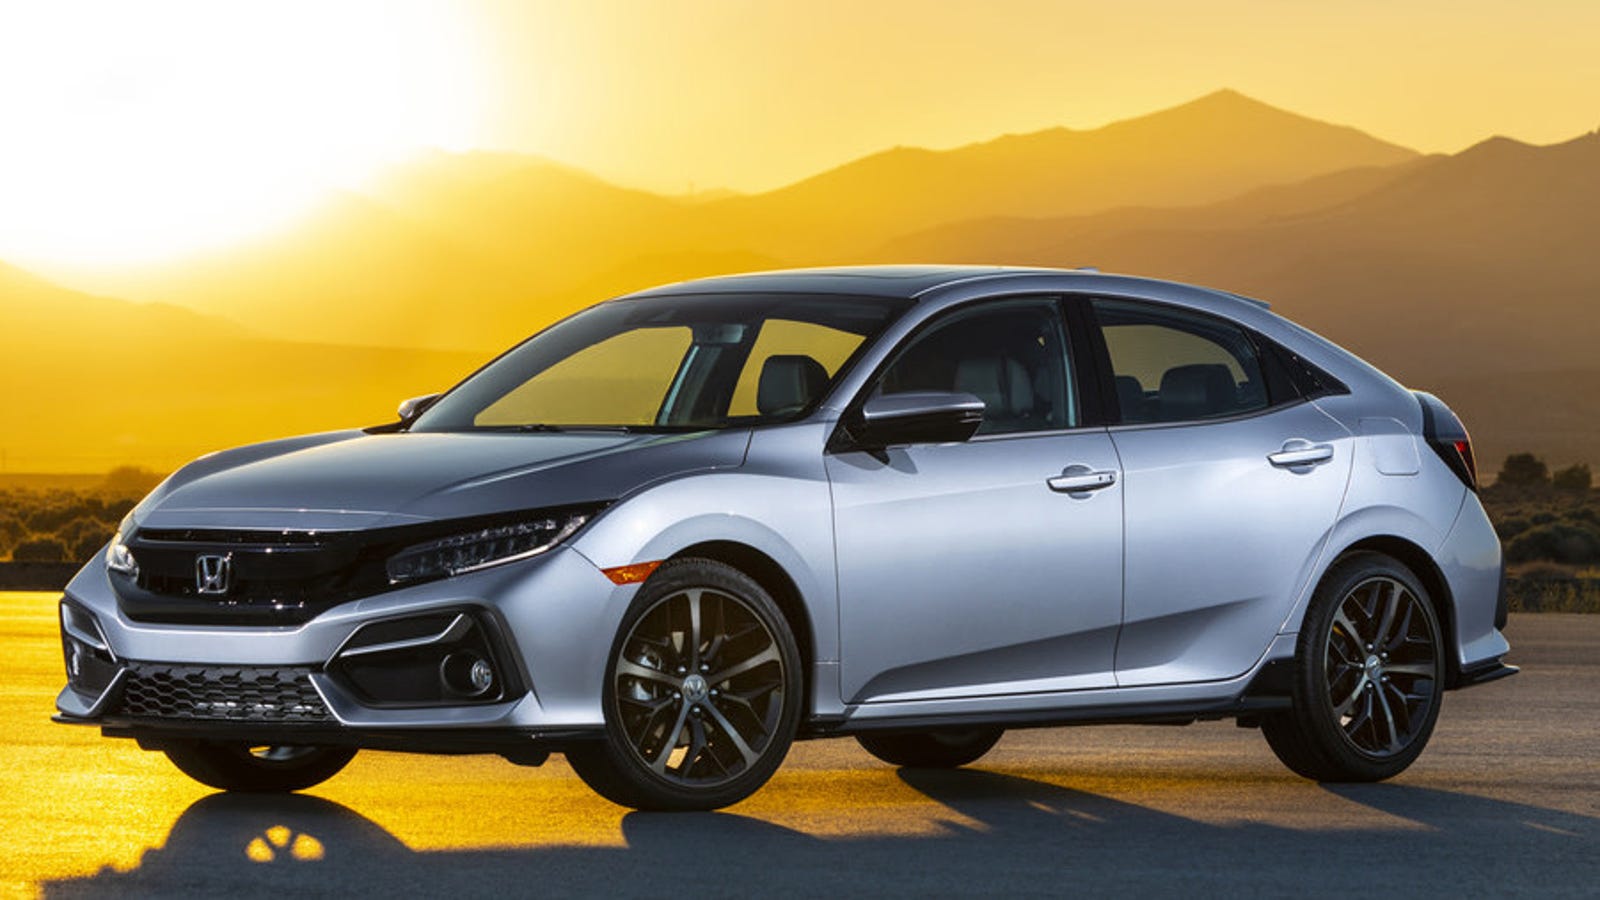 The 2020 Honda Civic Hatchback Gets The Manual For The Top Trim